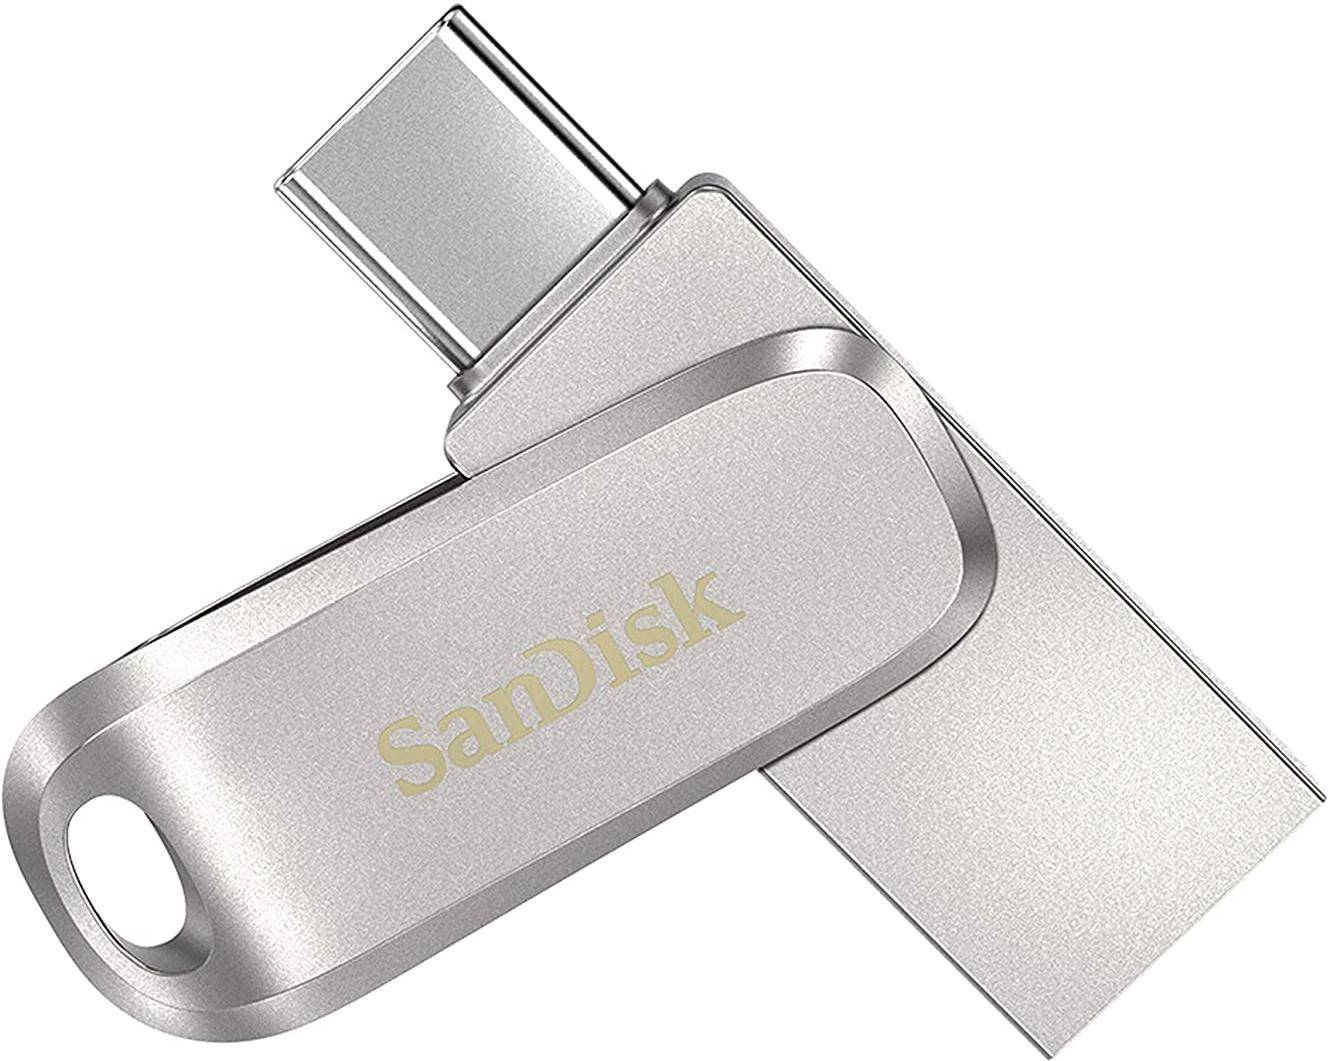 SanDisk Ultra Dual Drive Luxe USB Type-C 256GB Pendrive (SDDDC4-256G-I35) zoom image